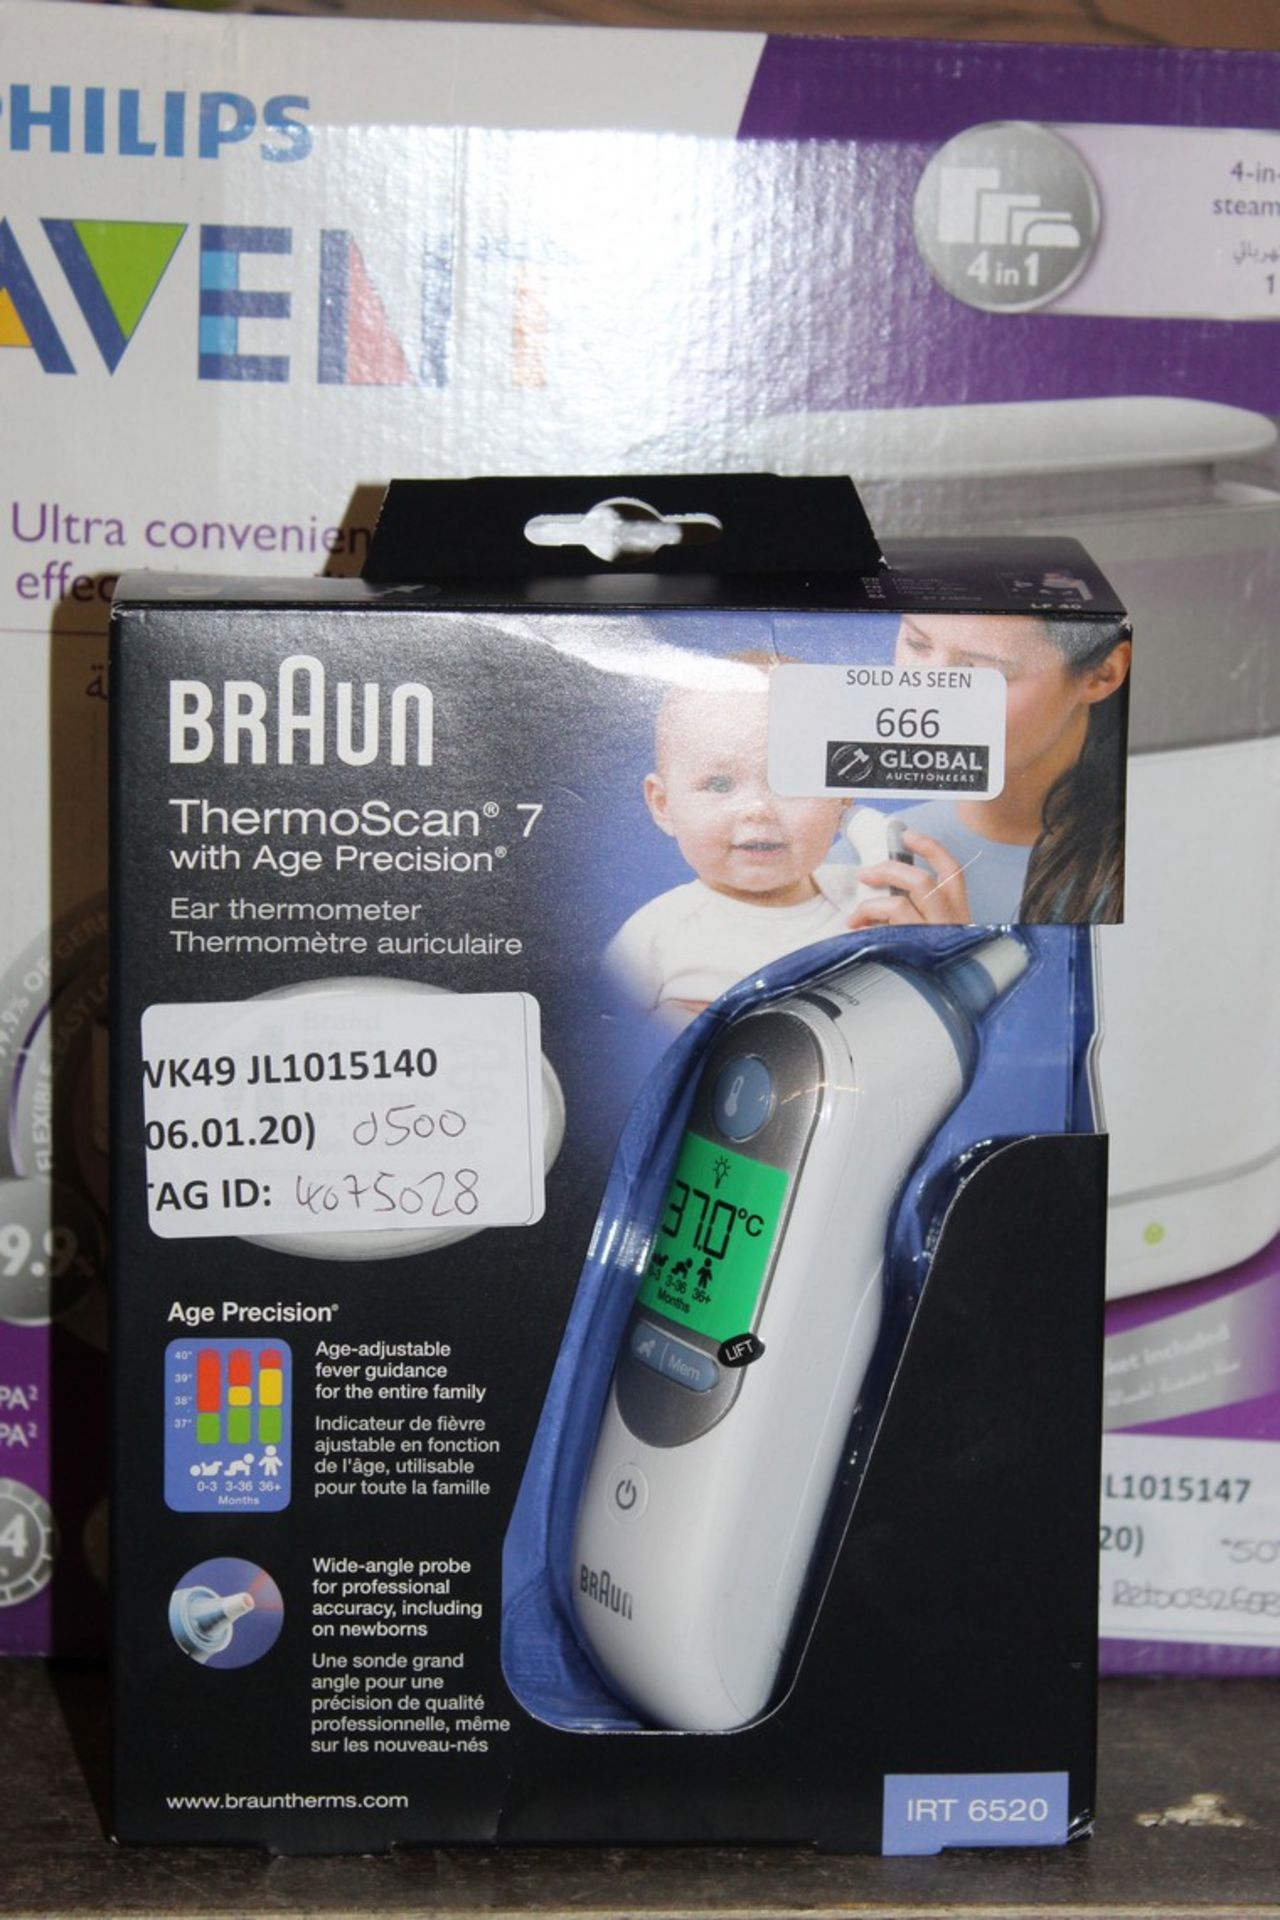 Assorted Items to Include a Braun Thermo Scan 7 Thermometer with H Precision and a Phillips Avent